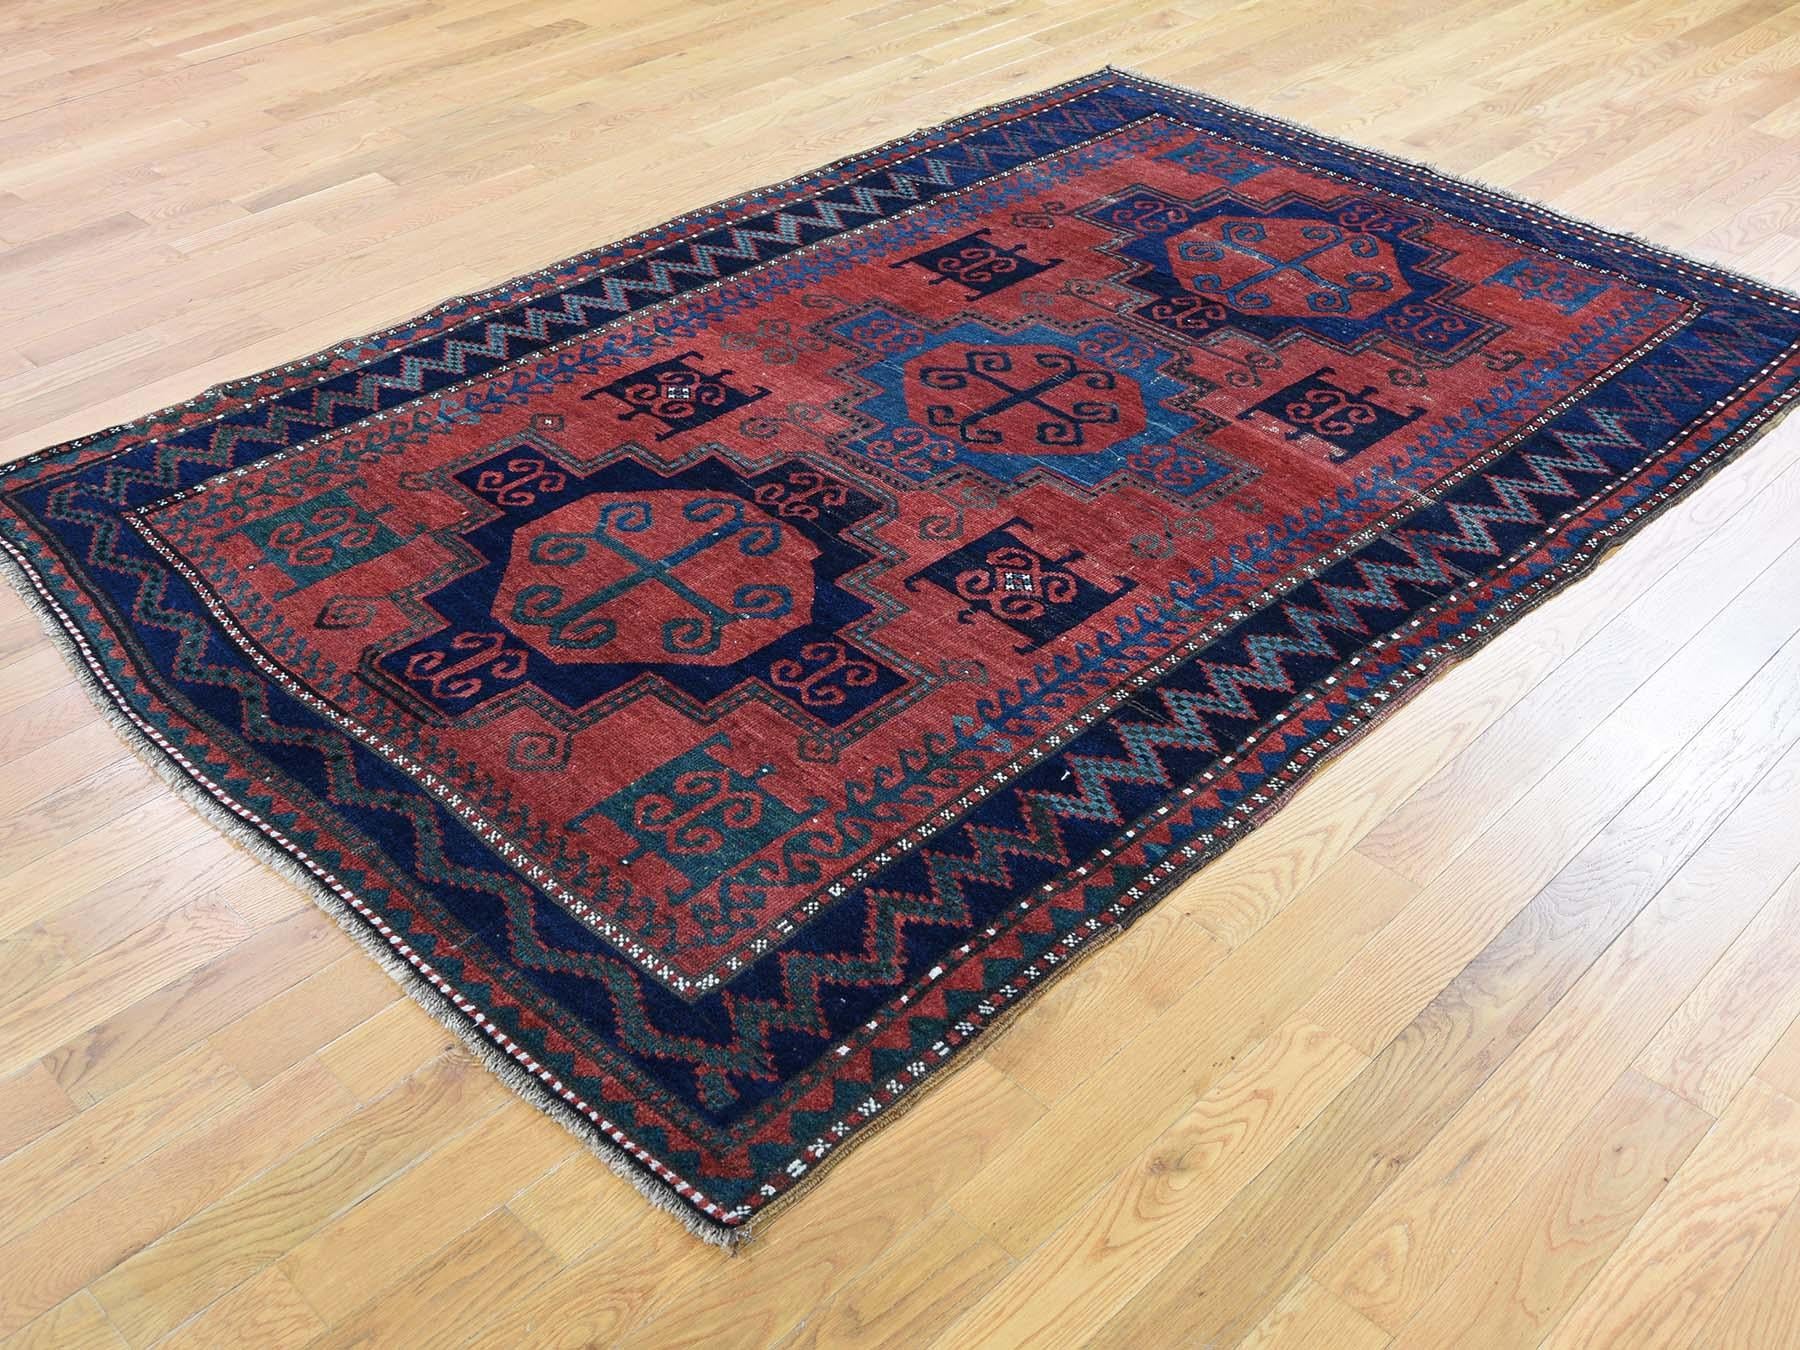 This is a genuine hand knotted oriental rug. It is not hand tufted or machine made rug. Our entire inventory is made of either hand knotted or handwoven rugs. 

Start a new room with this wonderful hand knotted red antique Persian Caucasian, it is